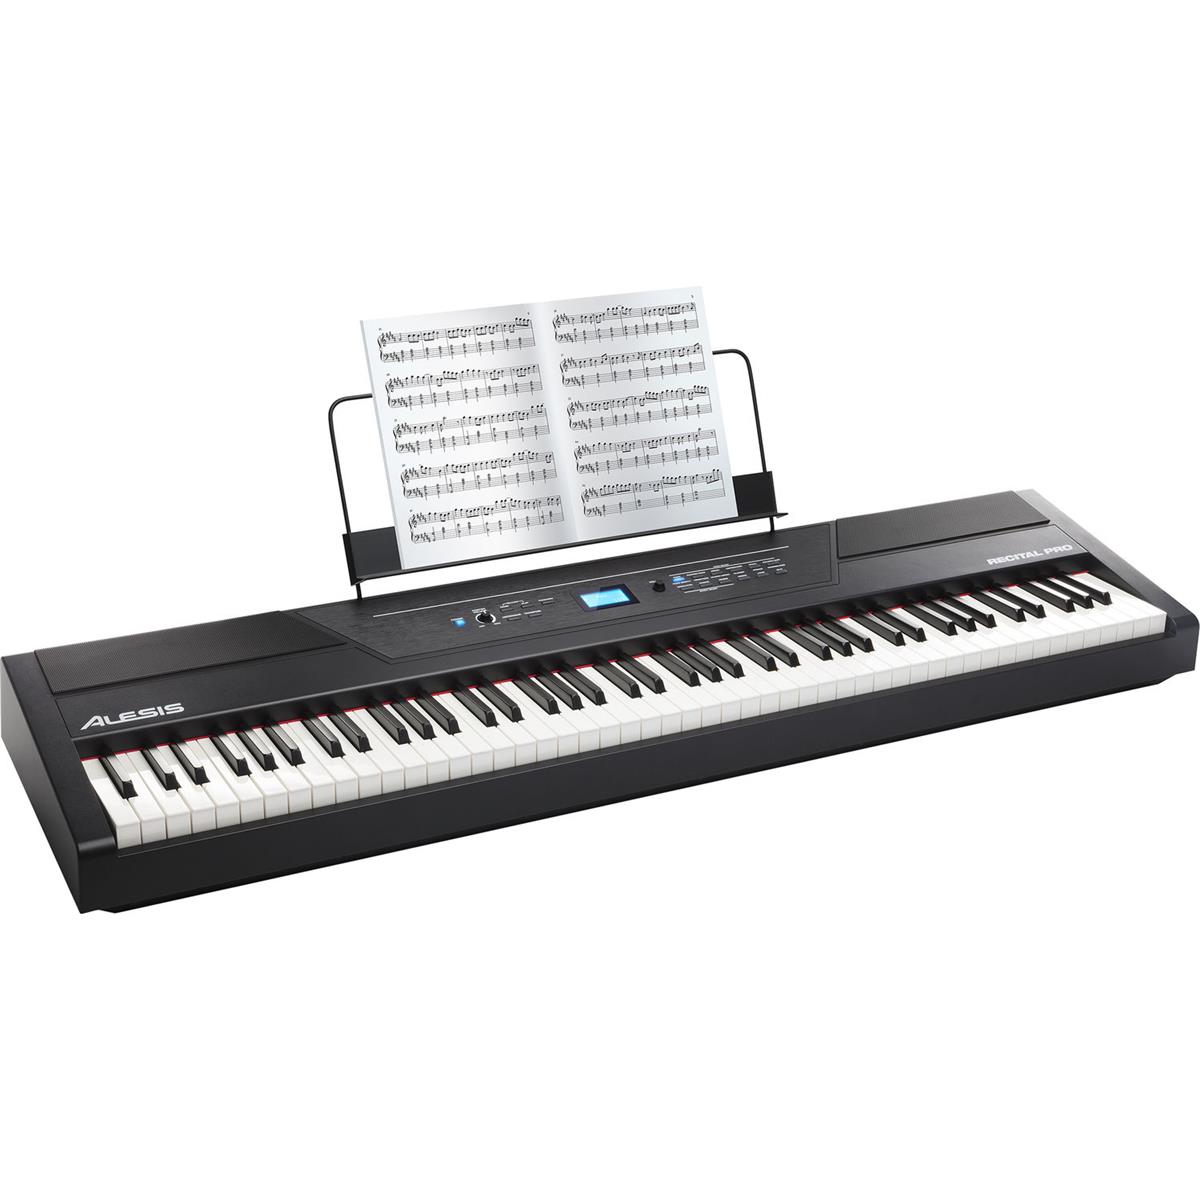 Image of Alesis Recital Pro Digital Piano with 88 Full-Sized Hammer-Action Keys